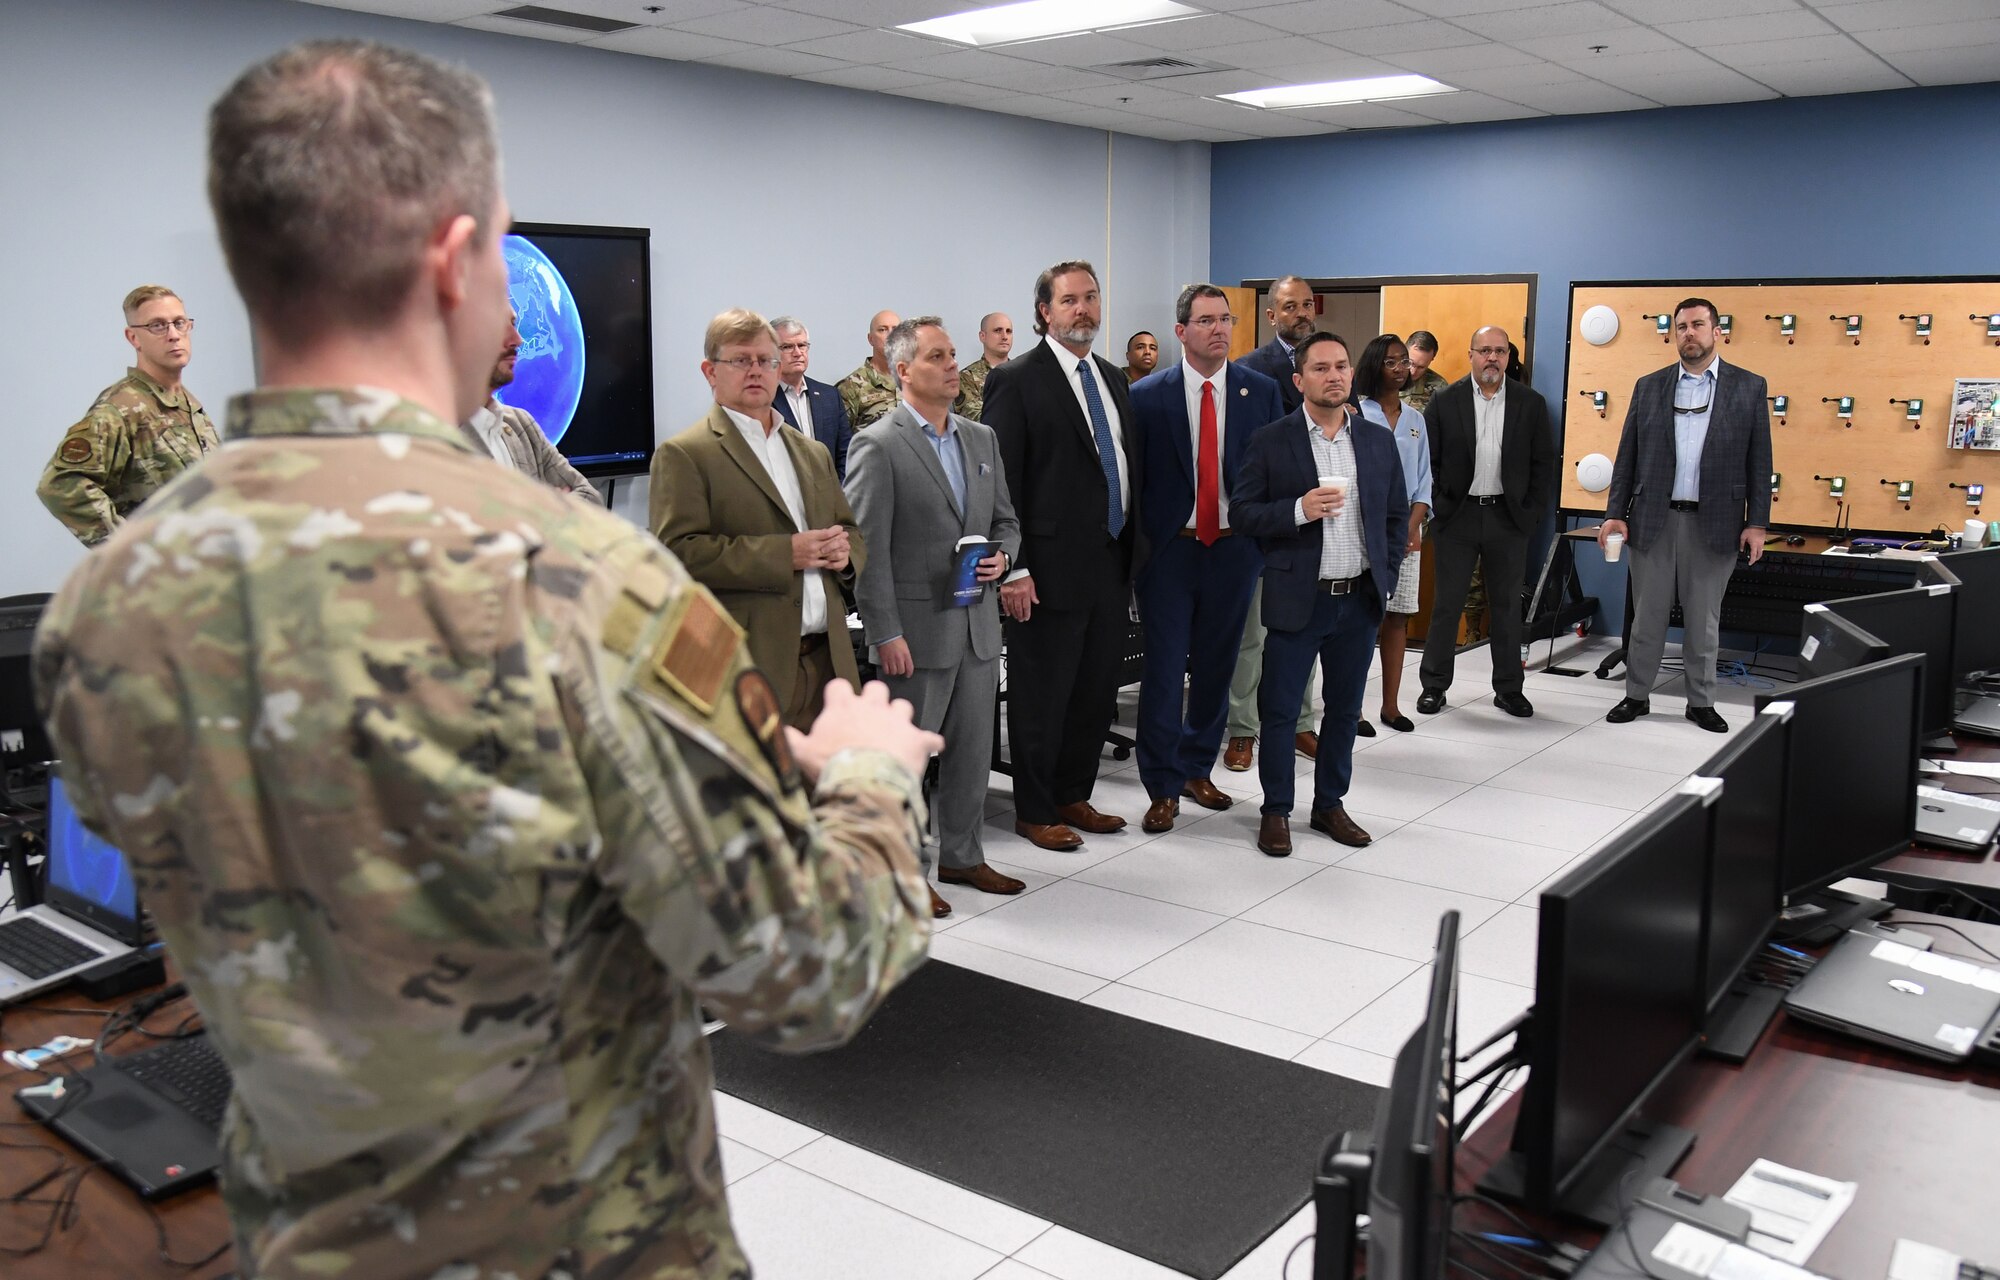 U.S. Air Force Master Sgt. Tanner Thomas, 333rd Training Squadron director of operations, briefs state and local civic leaders on the 333rd TRS cyber training capabilities during A Day At Keesler inside Stennis Hall at Keesler Air Force Base, Mississippi, Dec. 9, 2022.